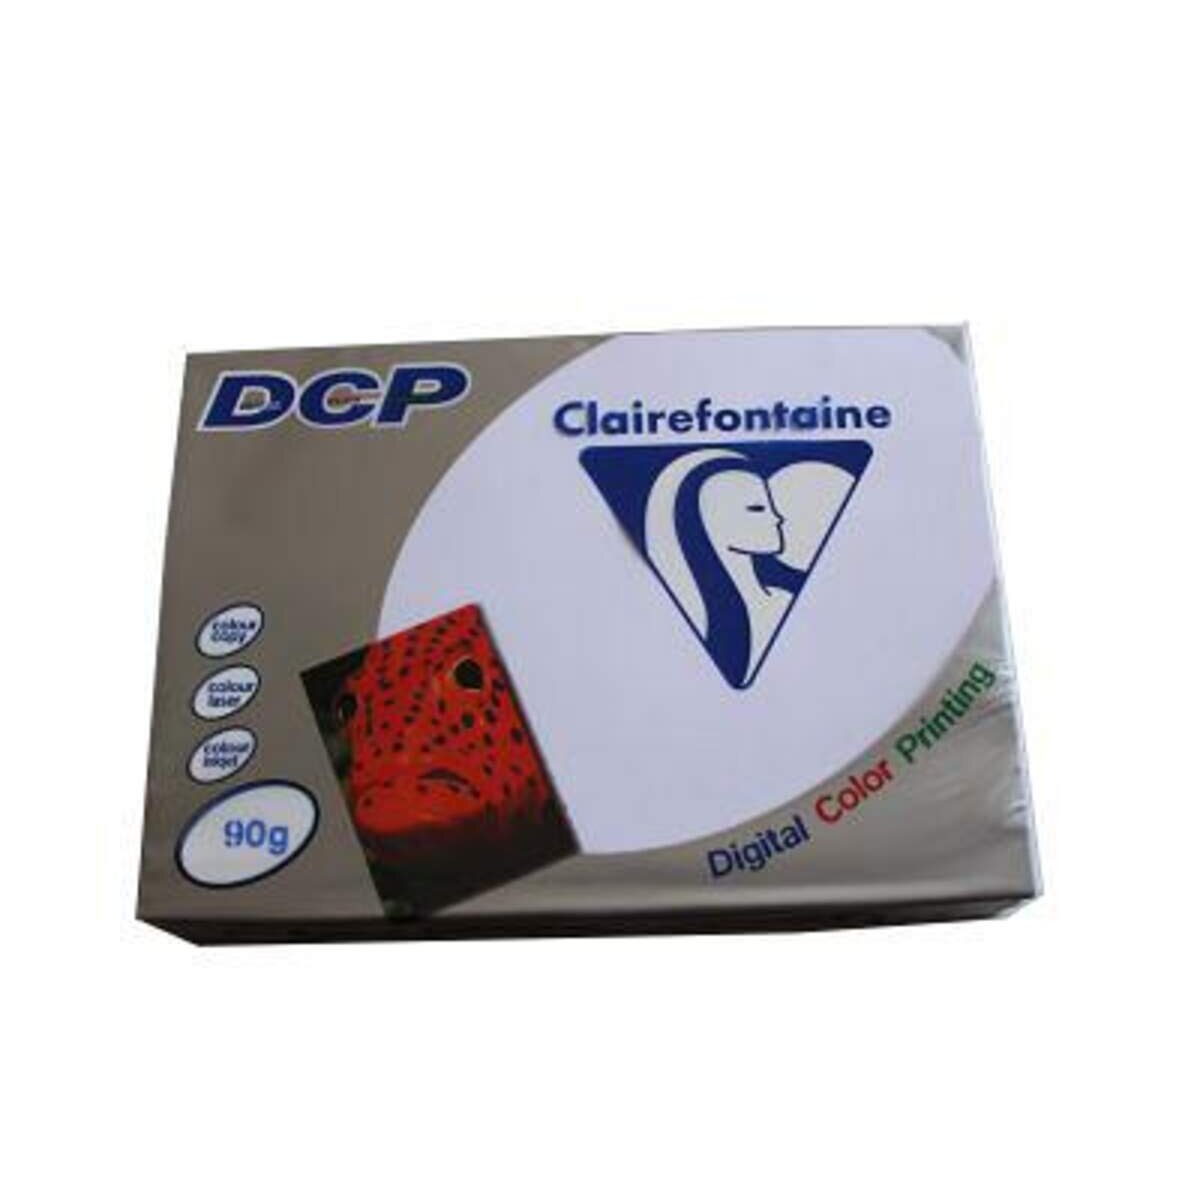 Clairefontaine DCP Digital Colour Printing, A4, 90 g/m²